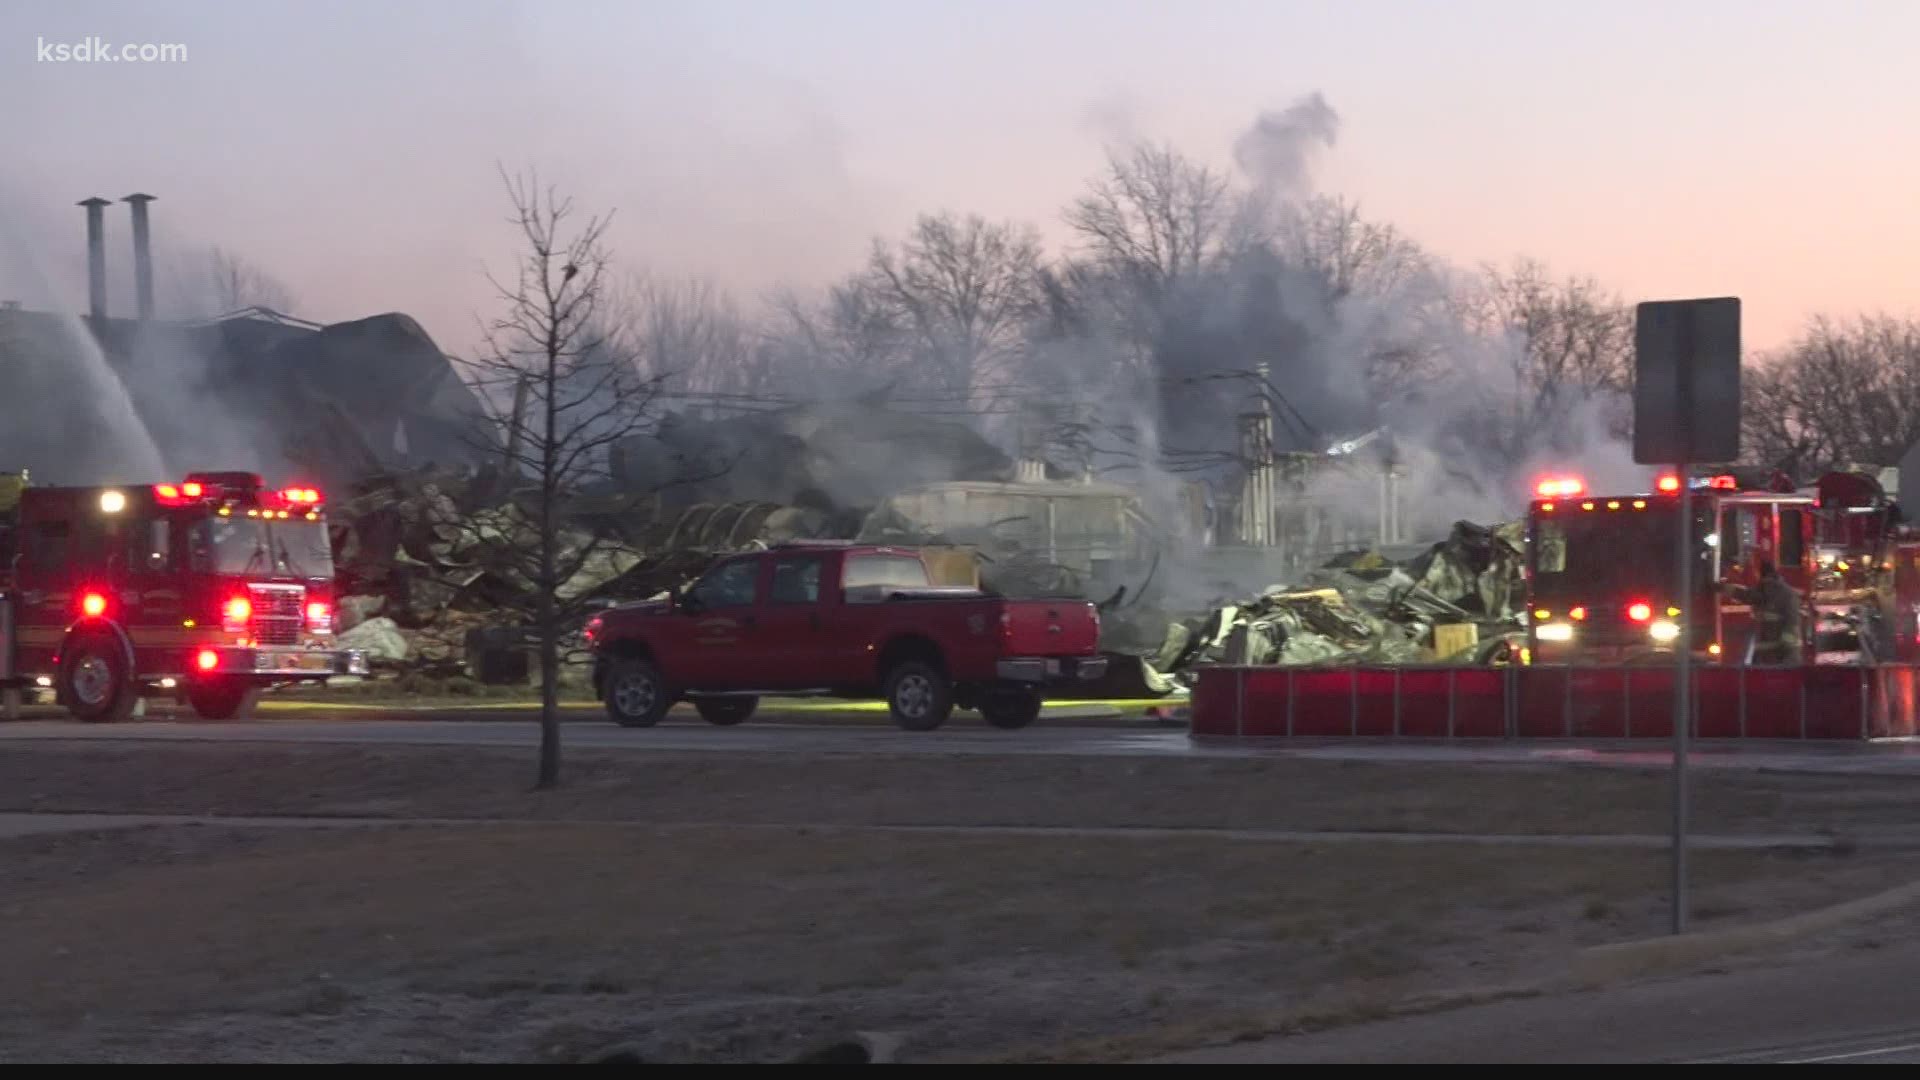 Crews say it went up in flames Monday night around 10 on the roof. It took 15 municipalities to extinguish the flames an effort that went well into the morning.